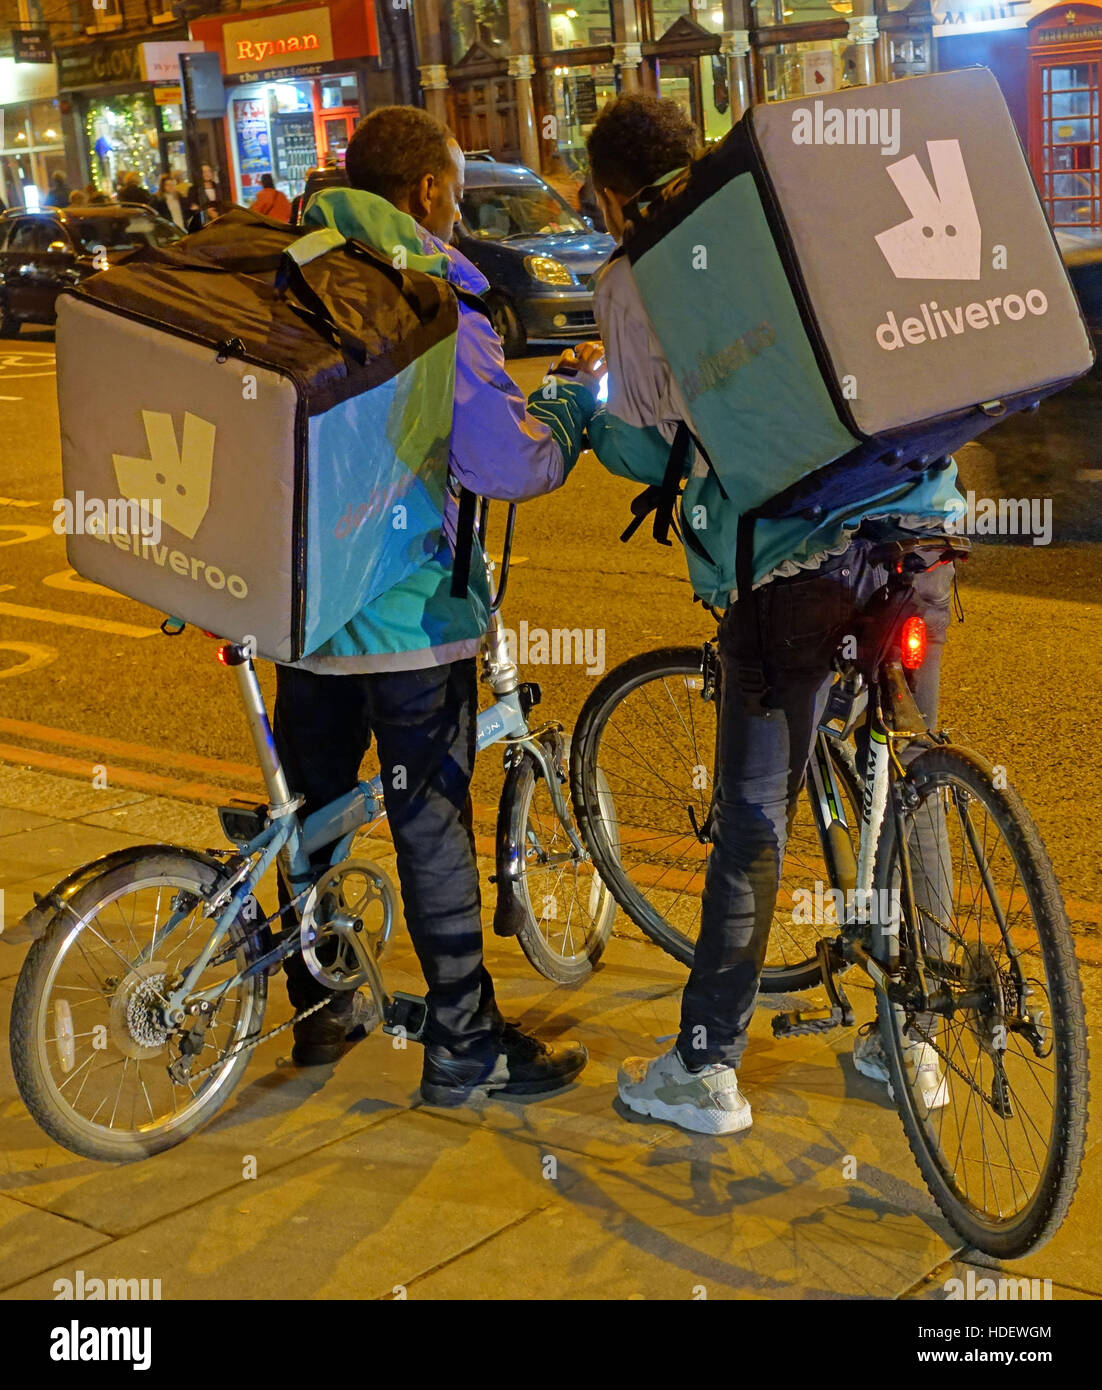 Deliveroo food delivery bicycle couriers in Islington, London Stock Photo